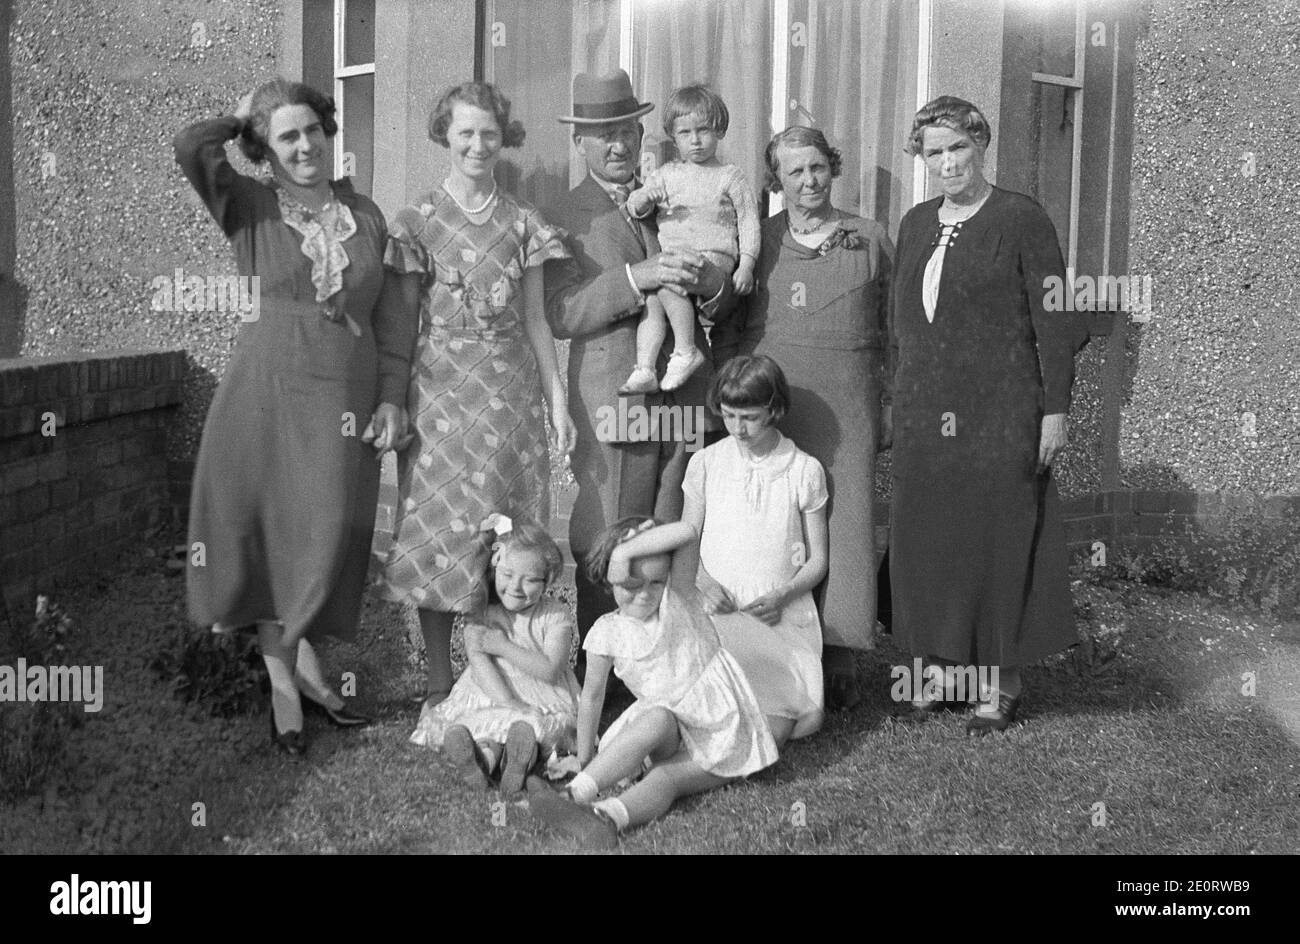 In a front garden outside a pebble dash semi-detached house, a family picture, circa 1930s, of a mother, sisters, grandparents and children, showing the male and female fashions of the day, England, UK. Stock Photo